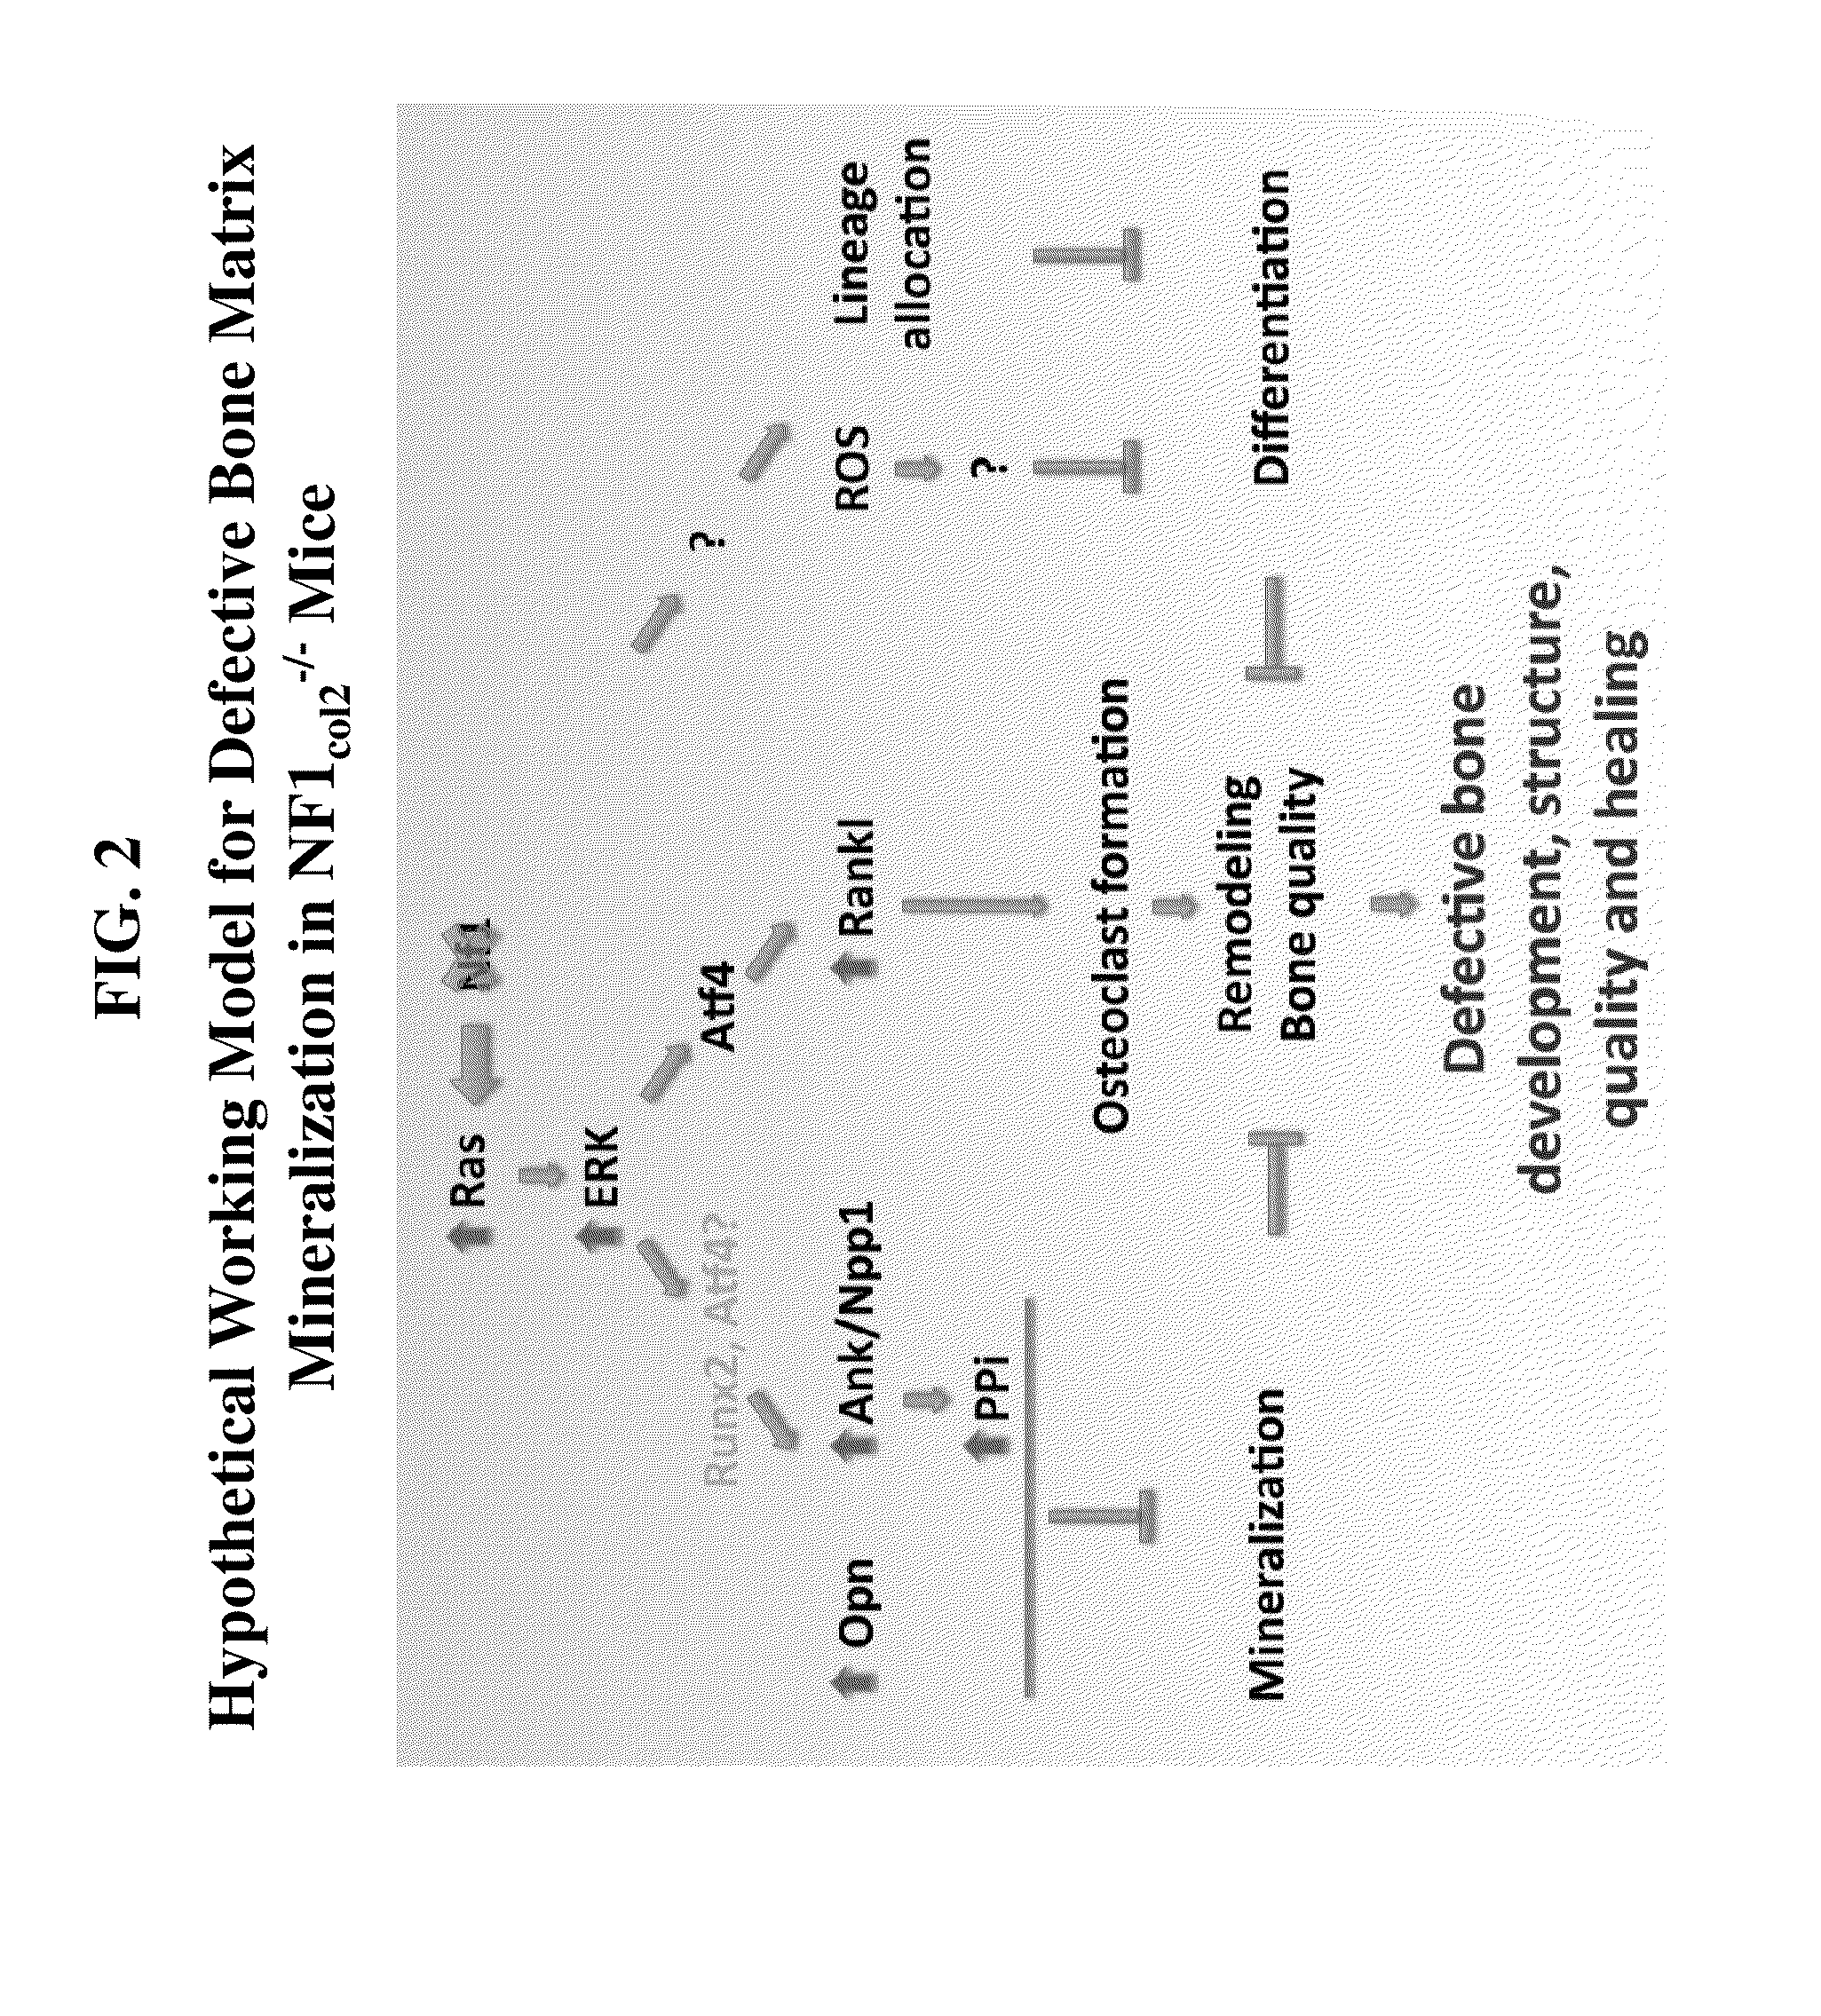 Compositions comprising alkaline phosphatase and/or natriuretic peptide and methods of use thereof